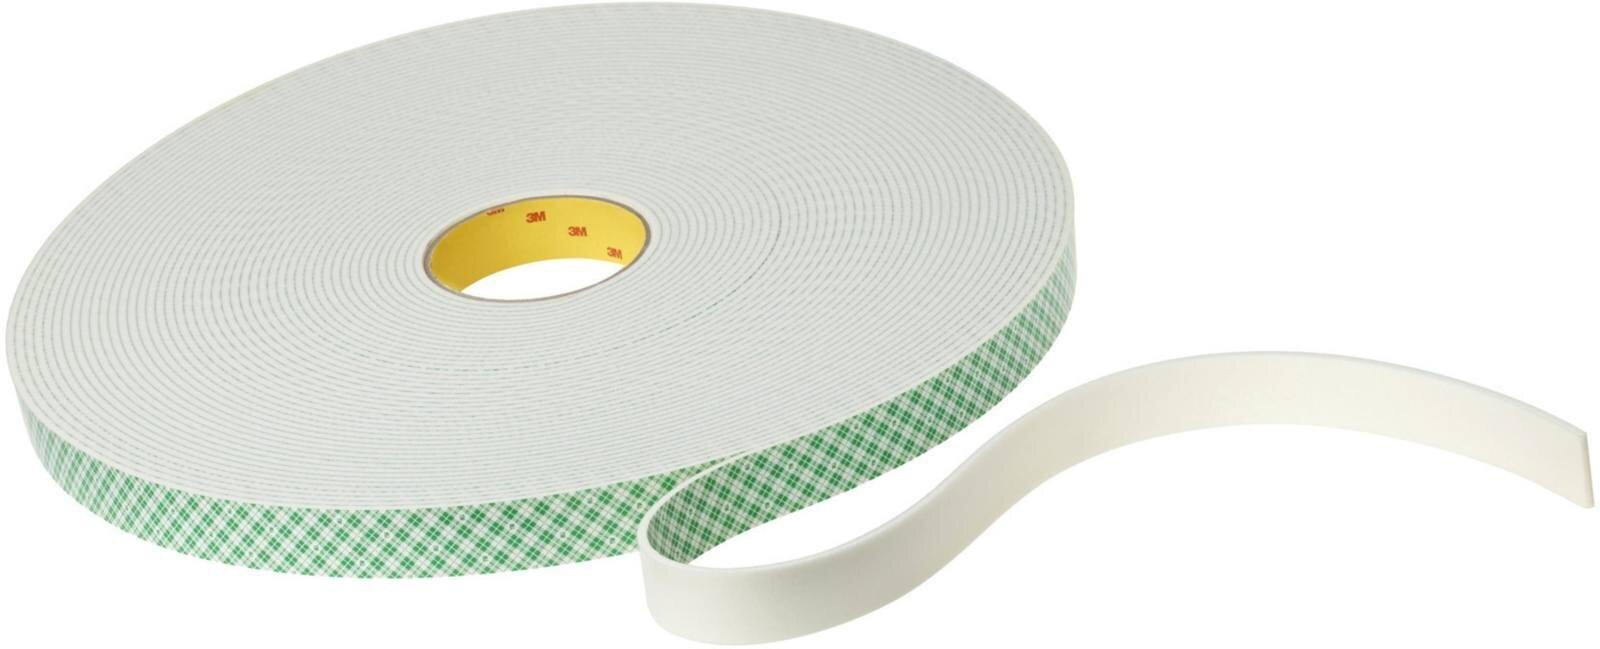 3M PU foam adhesive tape with acrylic adhesive 4008, beige, 38 mm x 33 m, 3.2 mm